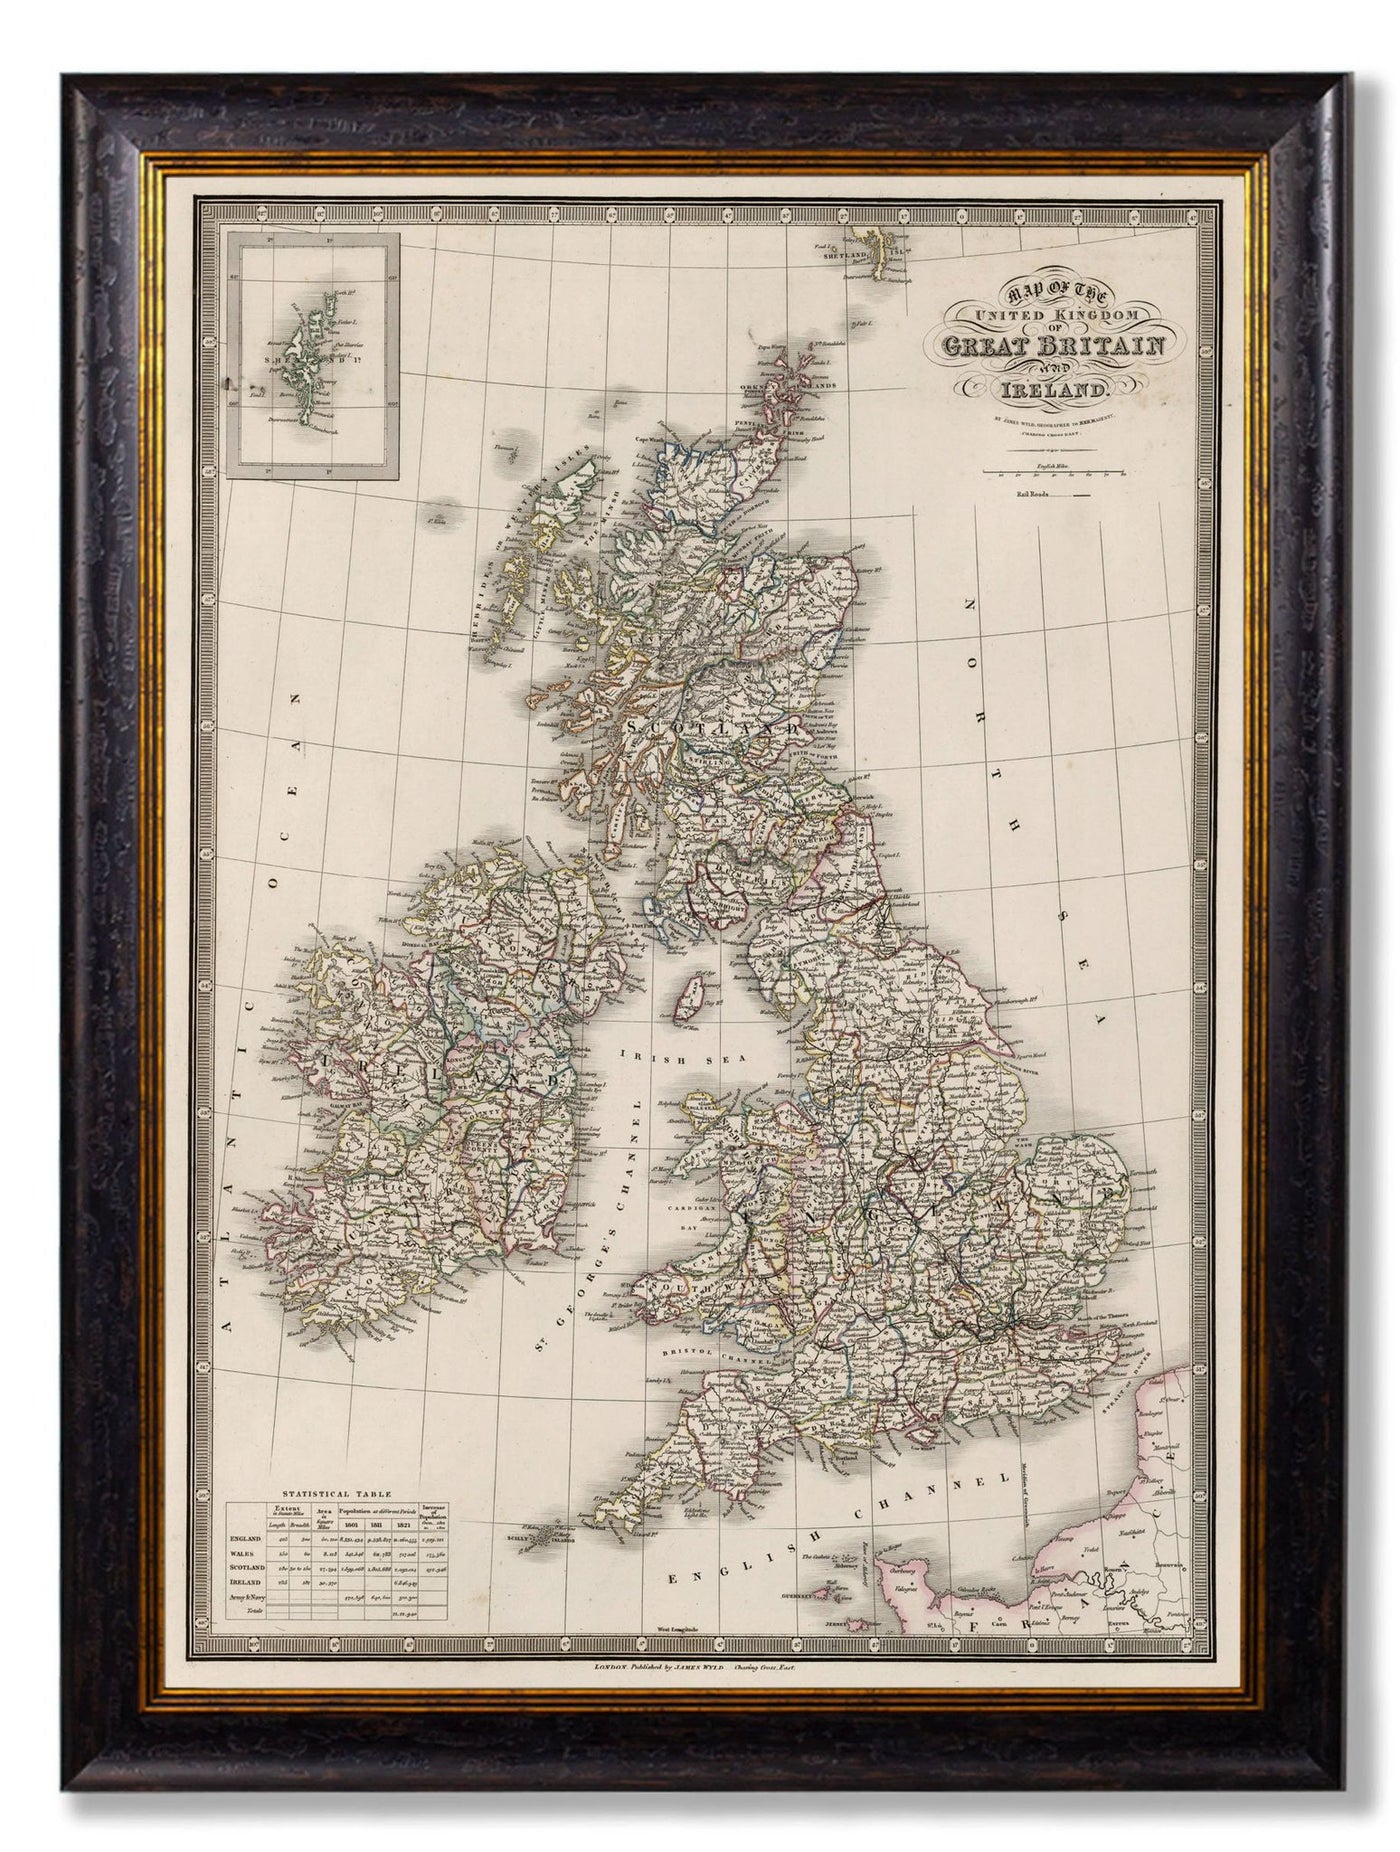 C.1838 MAP OF THE BRITISH ISLES - TheArtistsQuarter